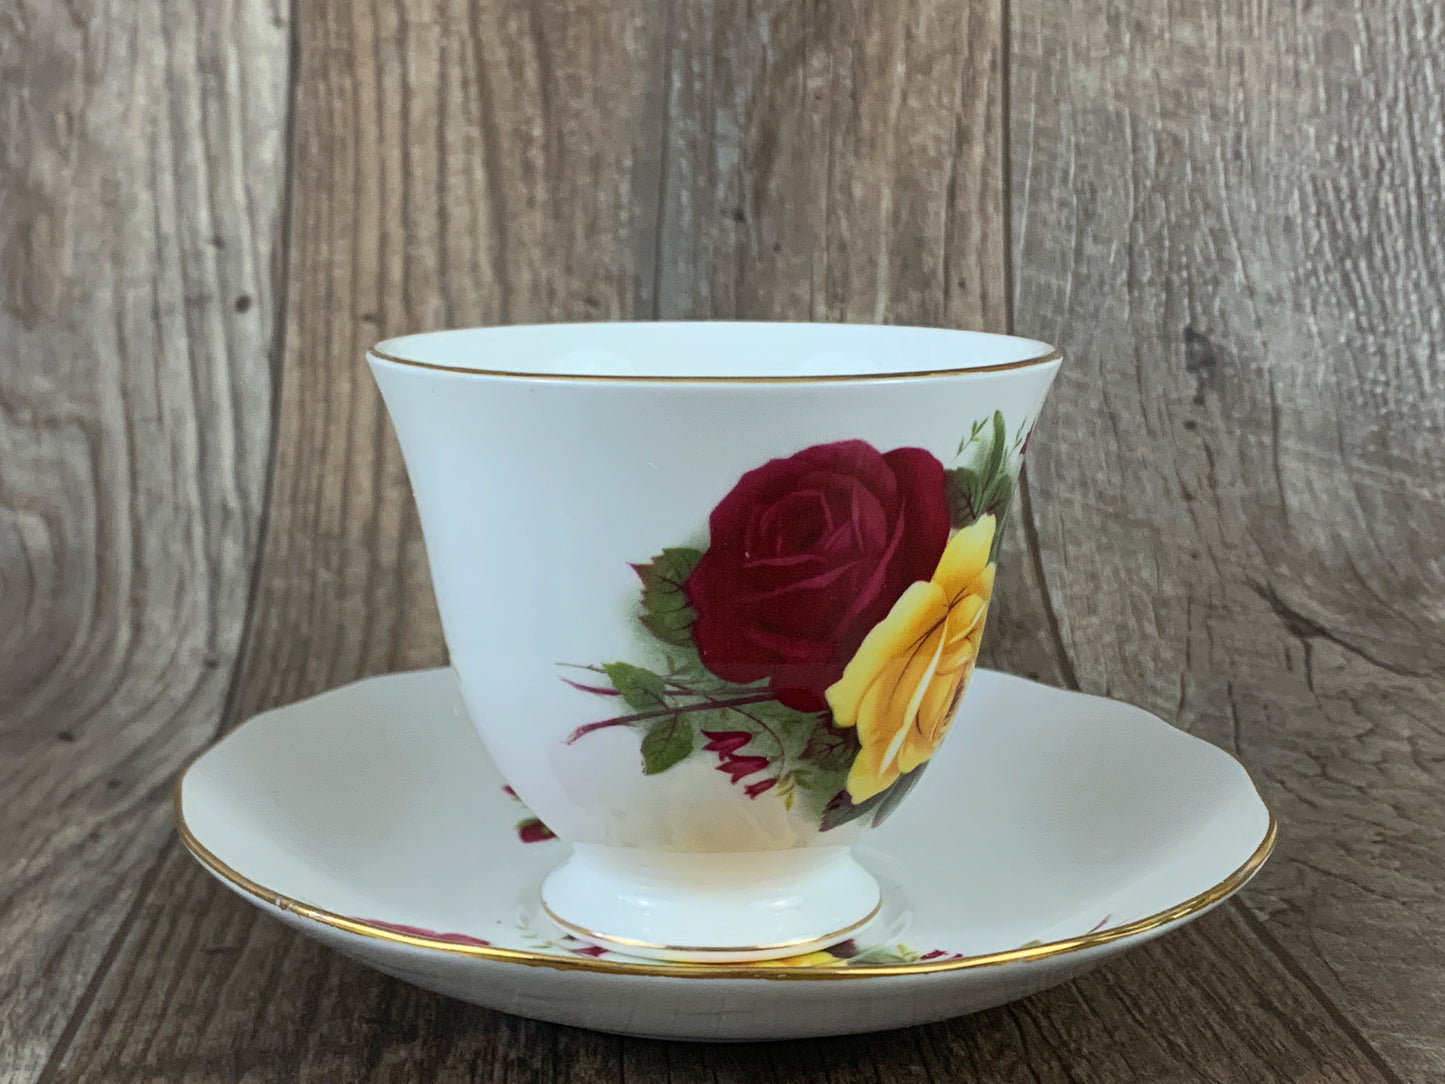 Red and Yellow Rose Teacup Vintage Tea Cup Vintage Gifts